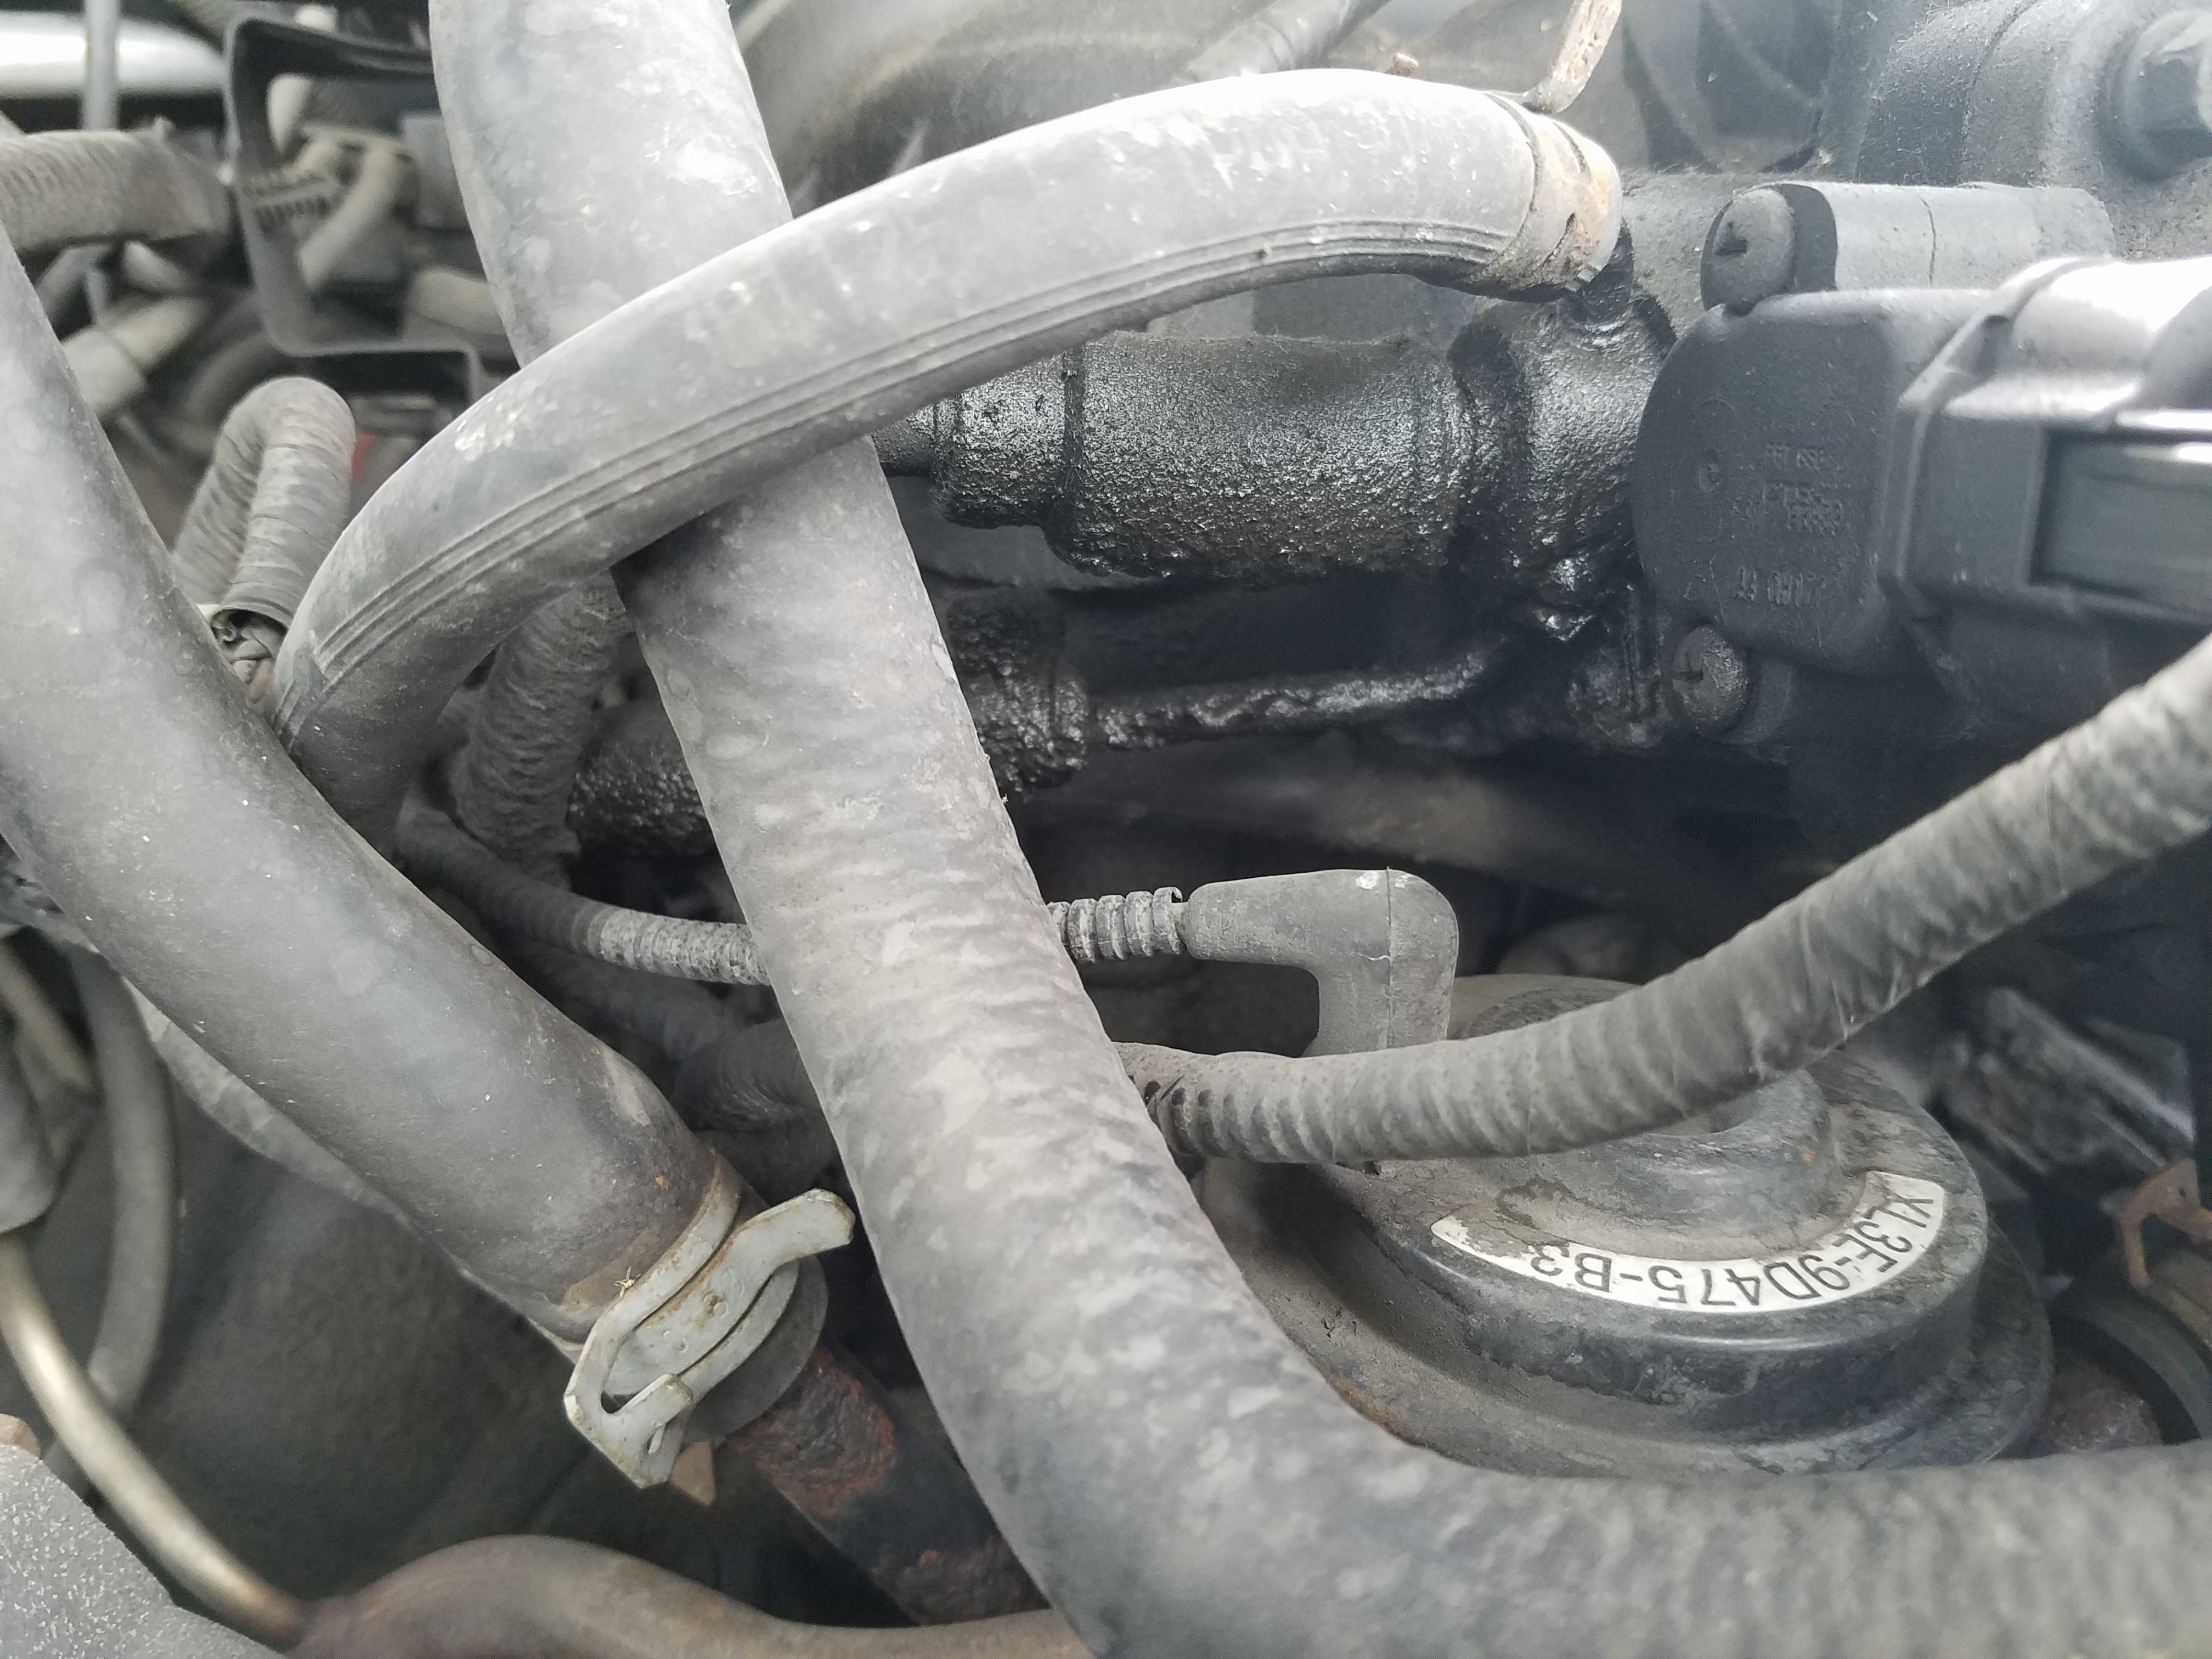 P0171/P0174 codes PCV valve? w/pictures Ford F150 Forum. 